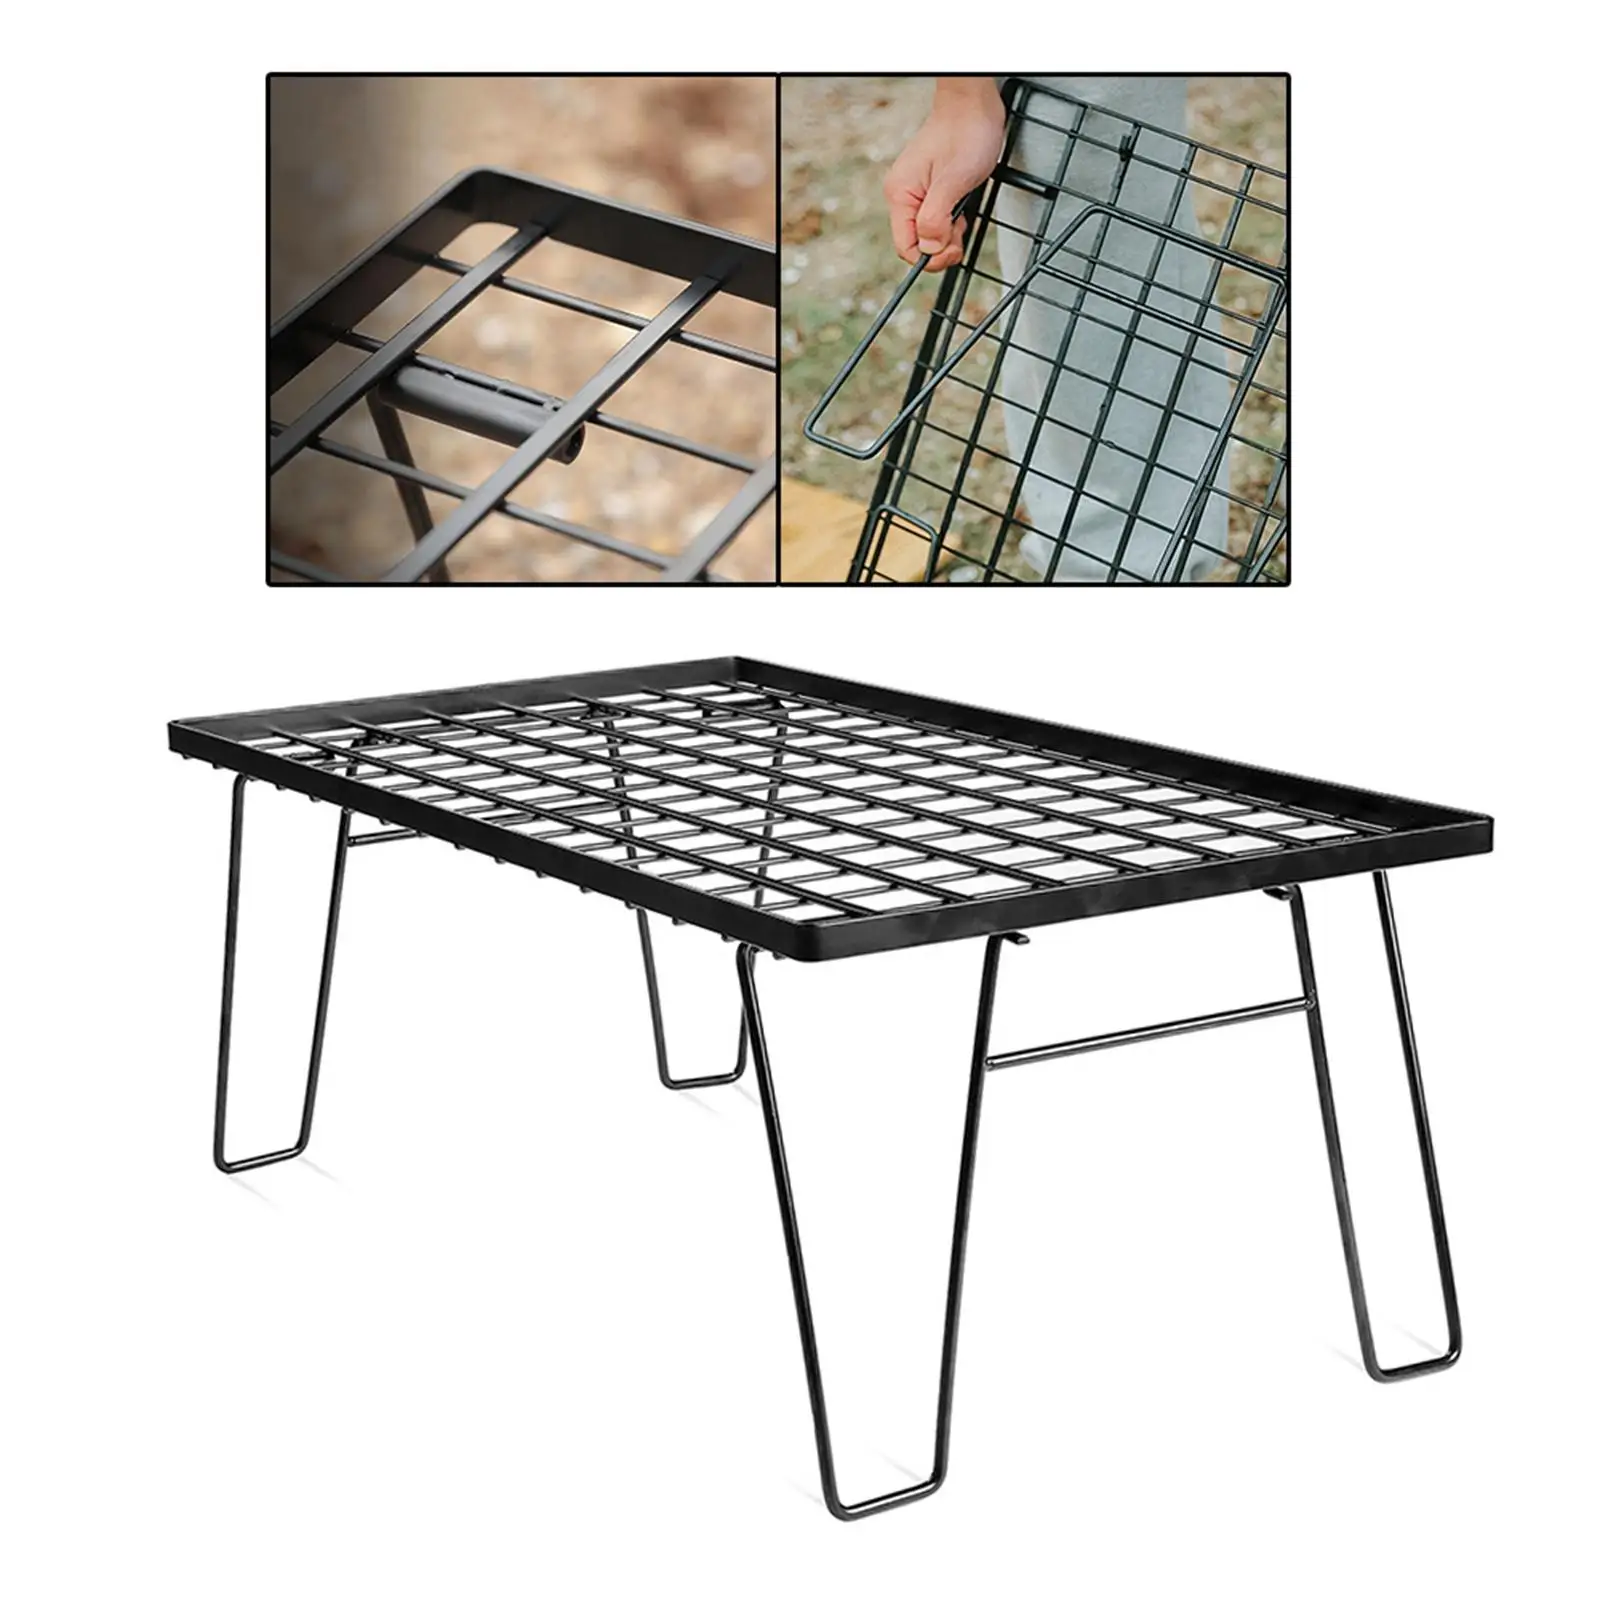 Outdoor Foldable Table Camping Table Campfire Grill for Travel Picnic Fishing Hiking